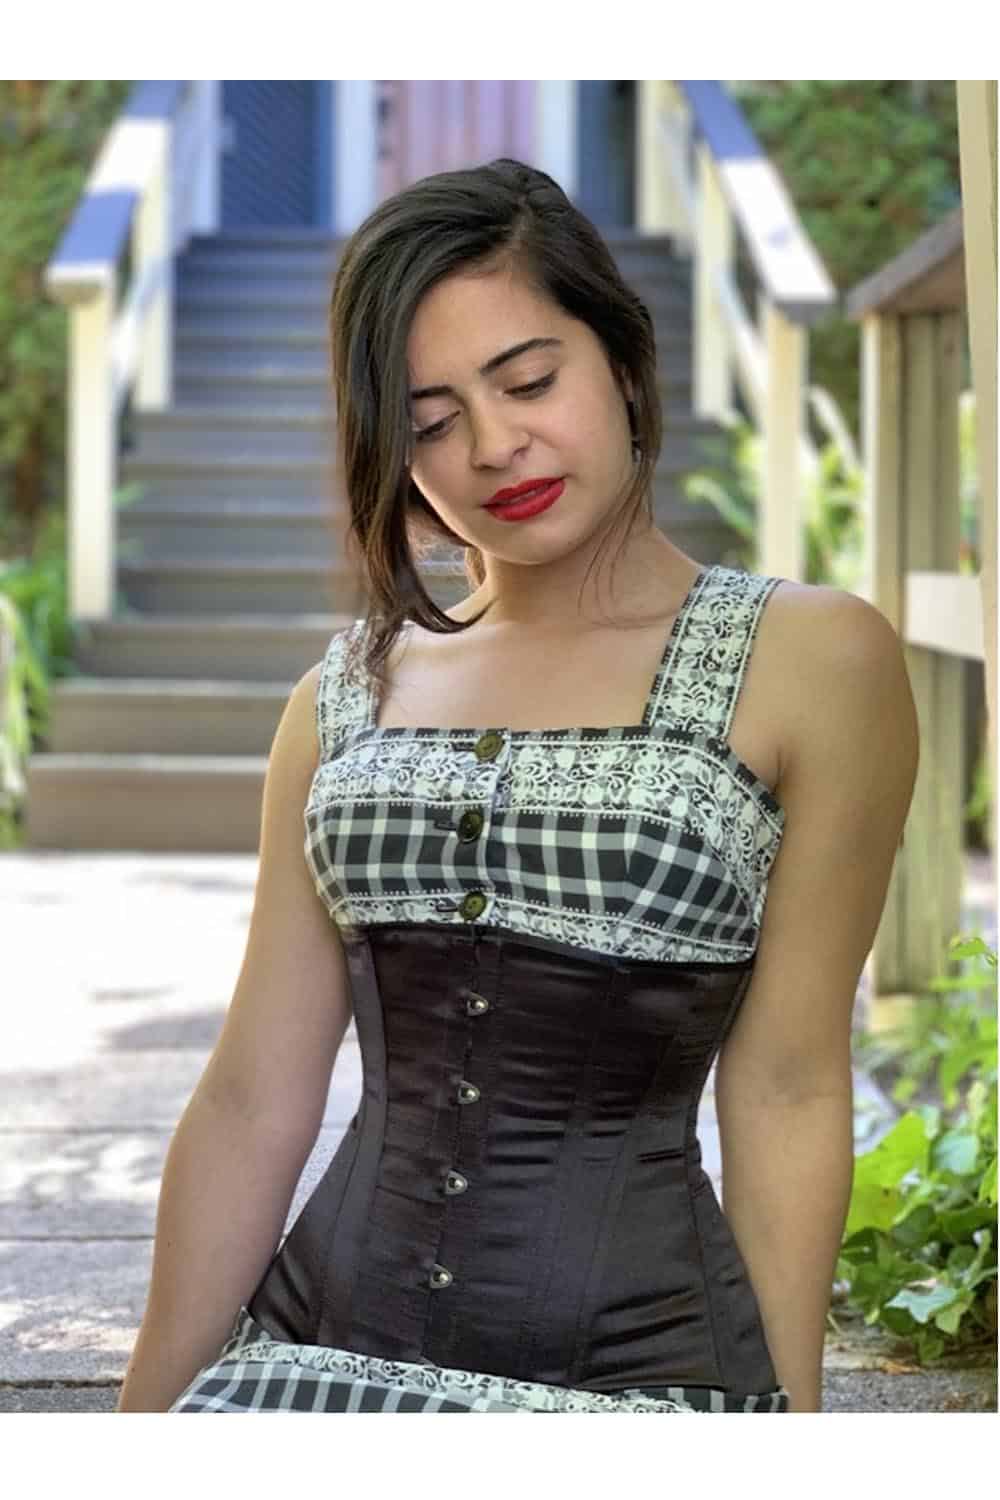 Accuracy and Comfort Combined – Get Your Corset Dress at True Corset!